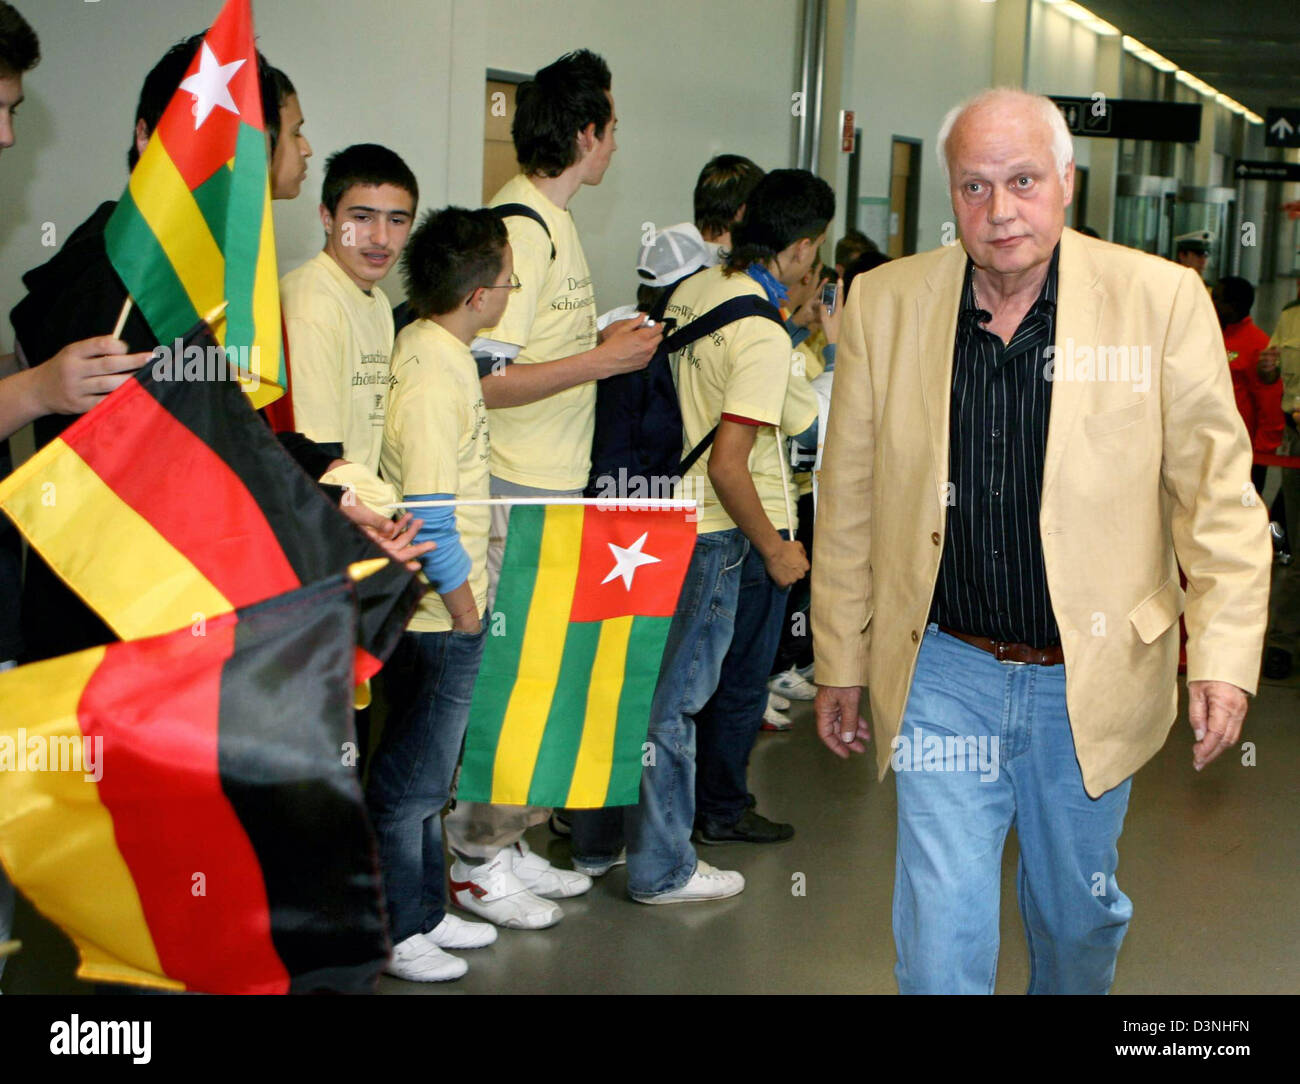 Otto Pfister, German head coach of Togo national soccer team, passes teenagers with the Togo flag after the team's arrival at the airport of Stuttgart, Germany, Monday, 15 May 2006. The Togo national team is the first FIFA WOrld Cup 2006 team to move into its accomodation in Wangen. Photo: Bernd Weissbrod Stock Photo